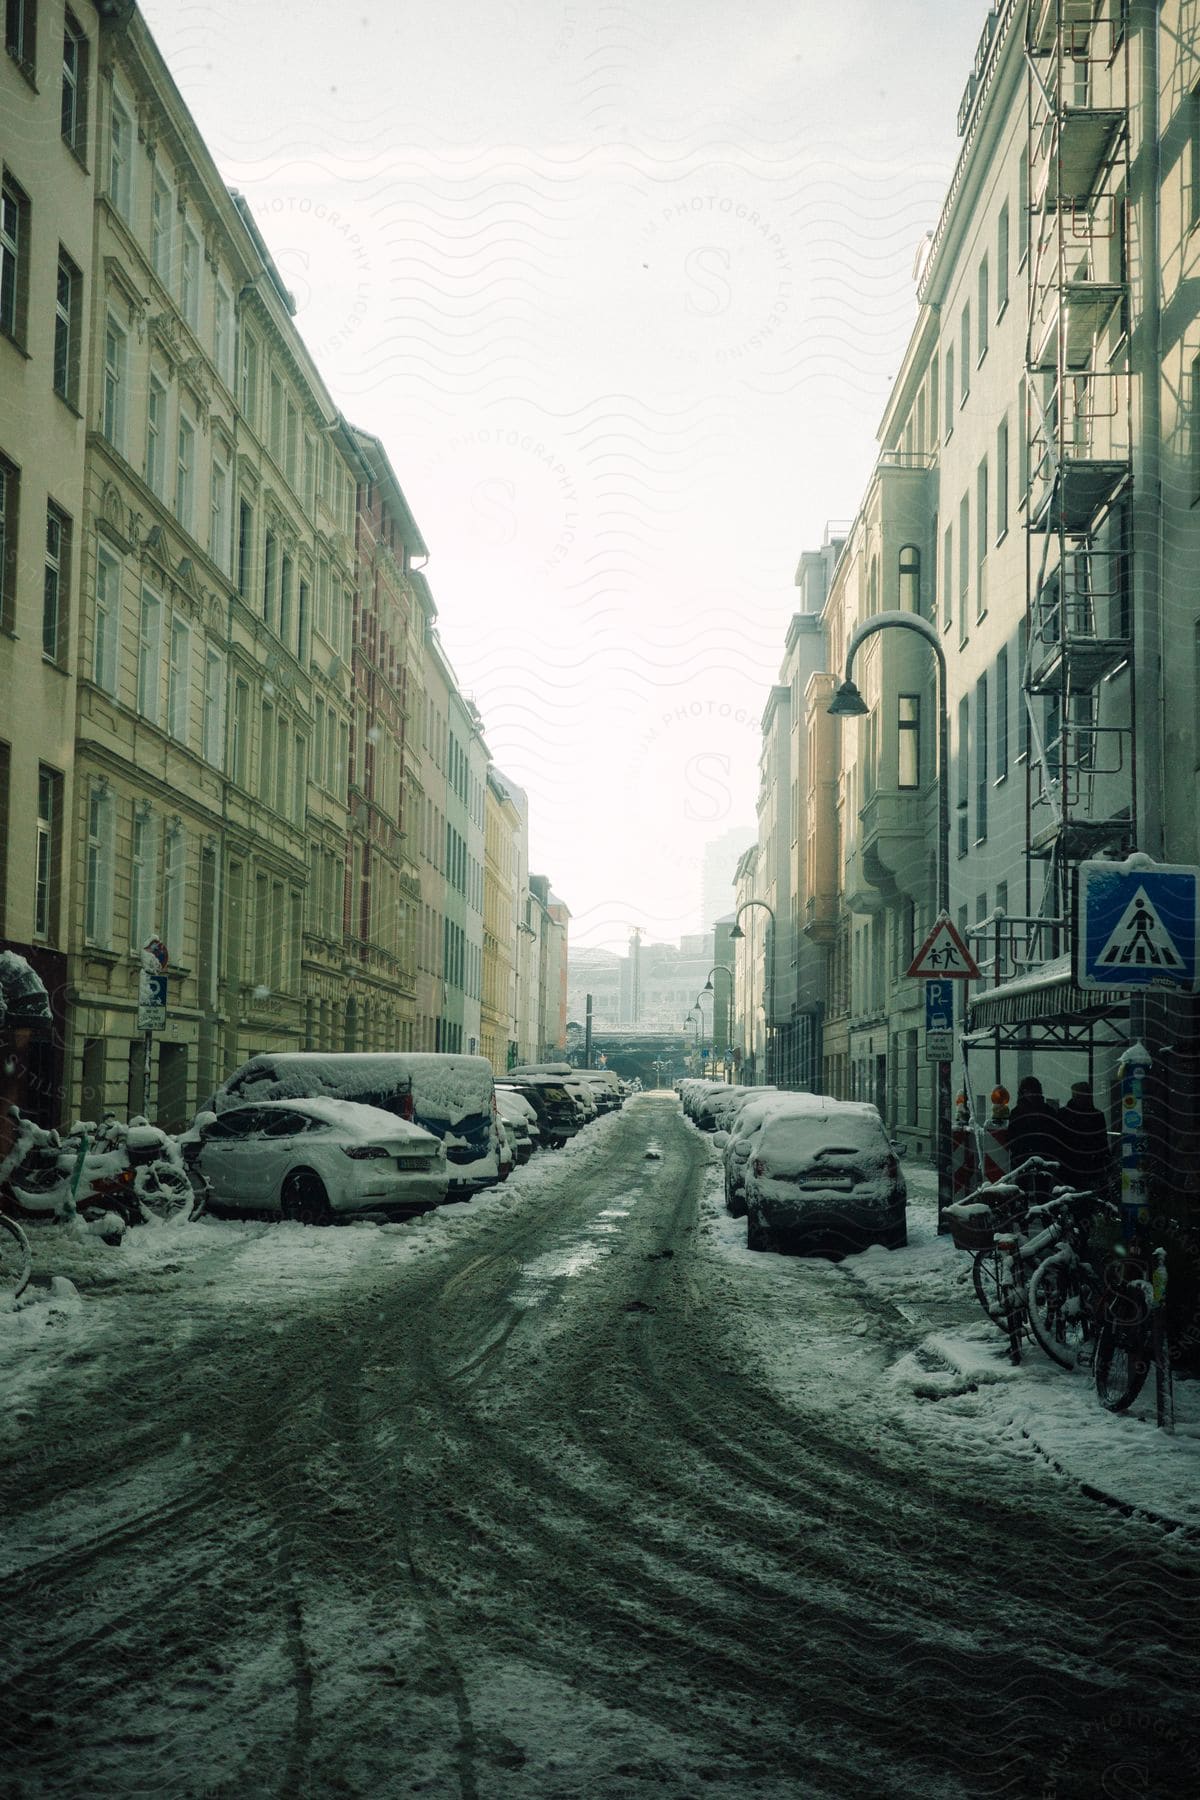 Snow-covered street with parked cars and bicycles in an urban setting, flanked by European-style buildings